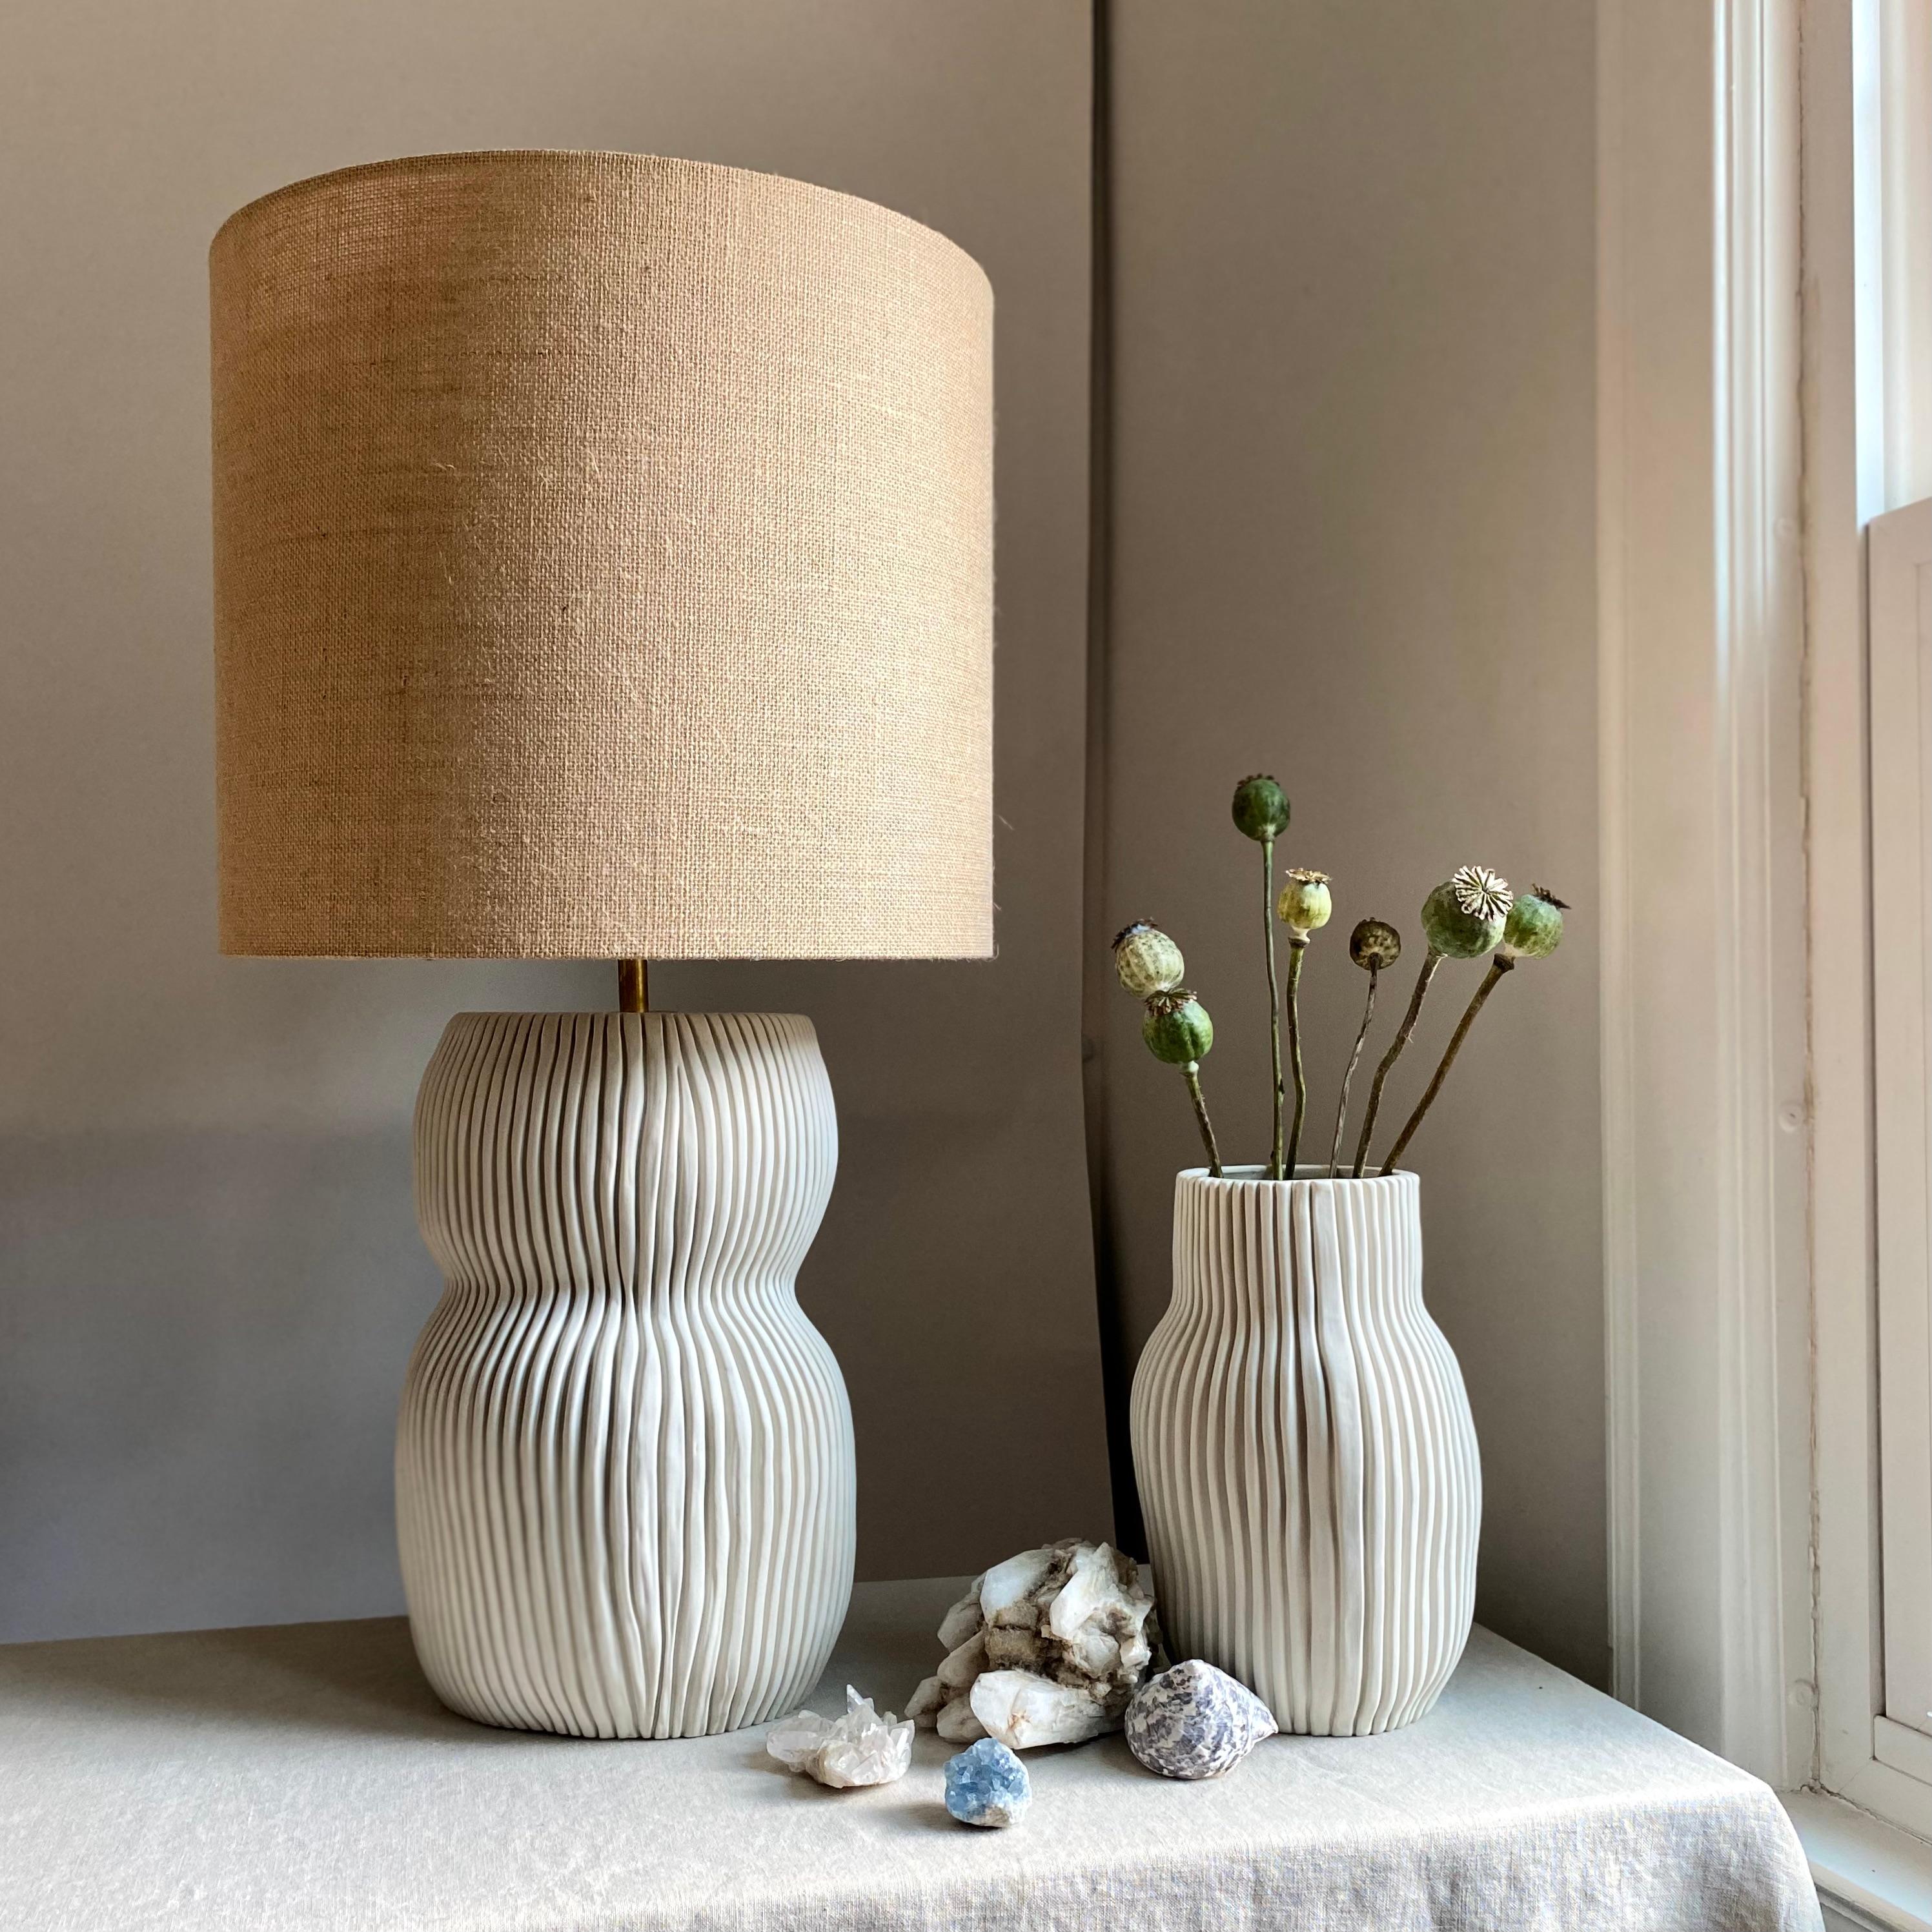 Hand-Crafted Organic Curvy Table Lamp #1 For Sale